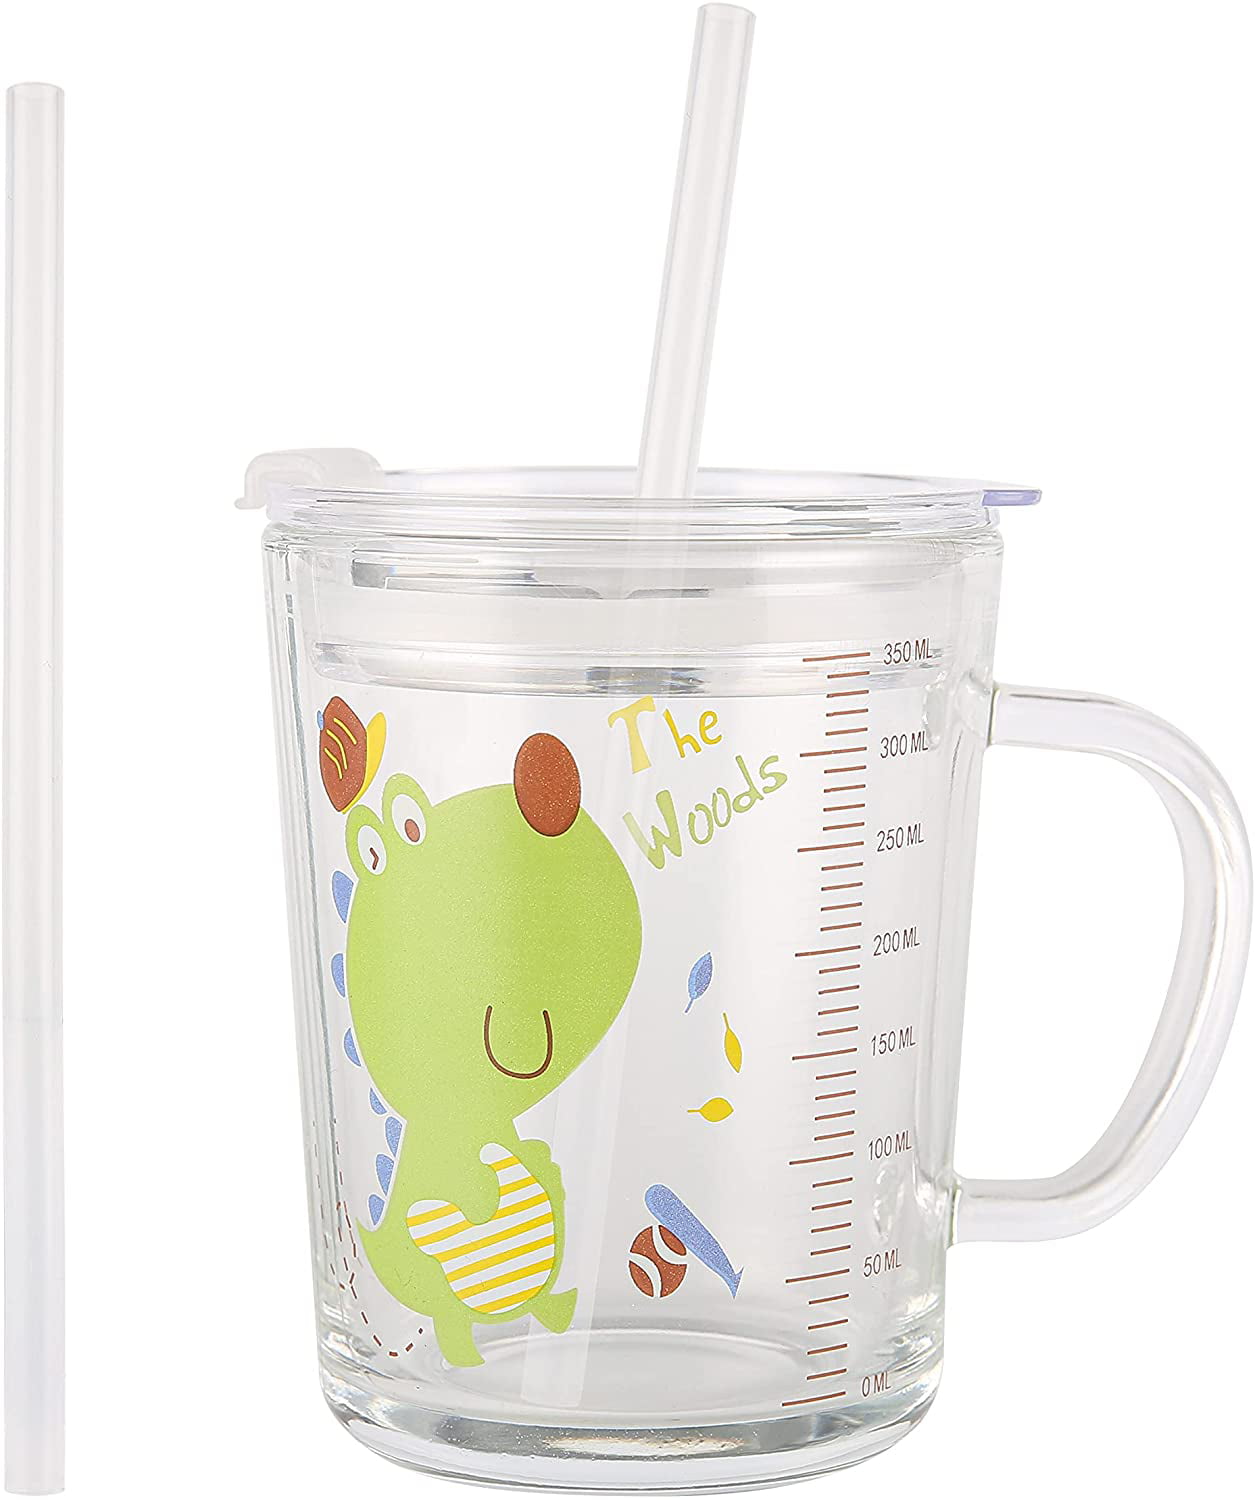 kid glass drinking cup plastic cup Dinosaur kids cup